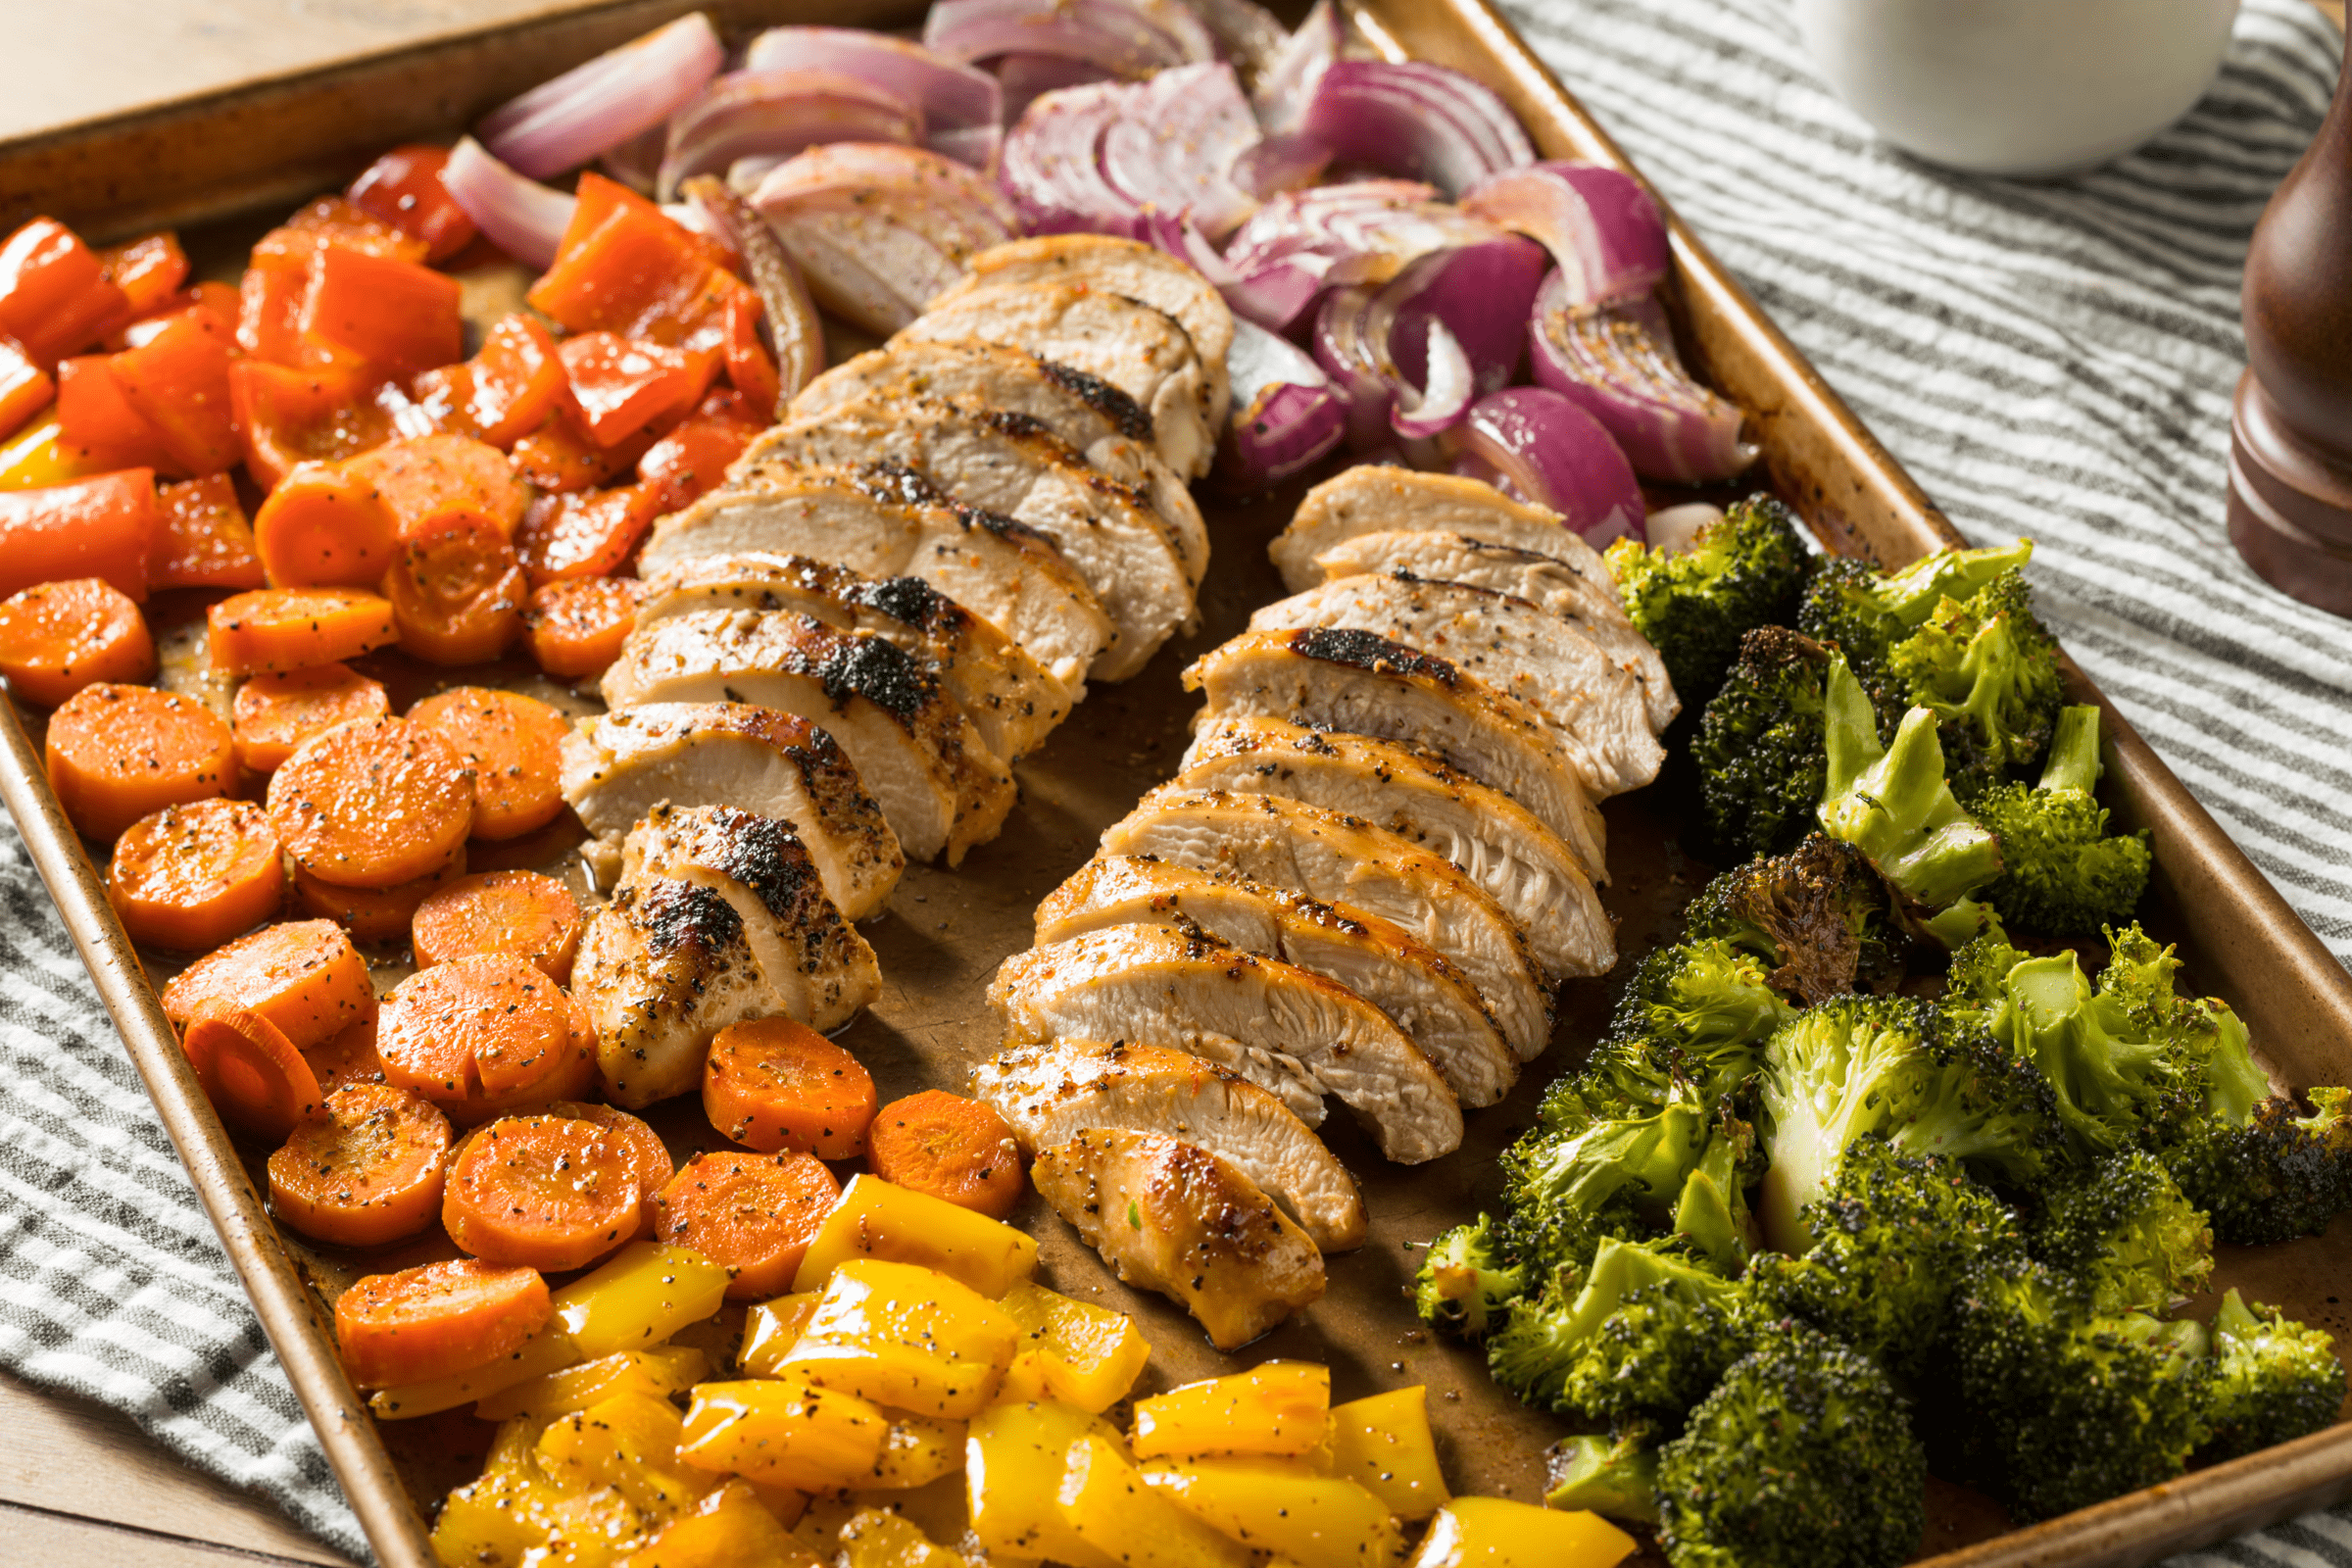 How to Make a Delicious One-Pan Meal: